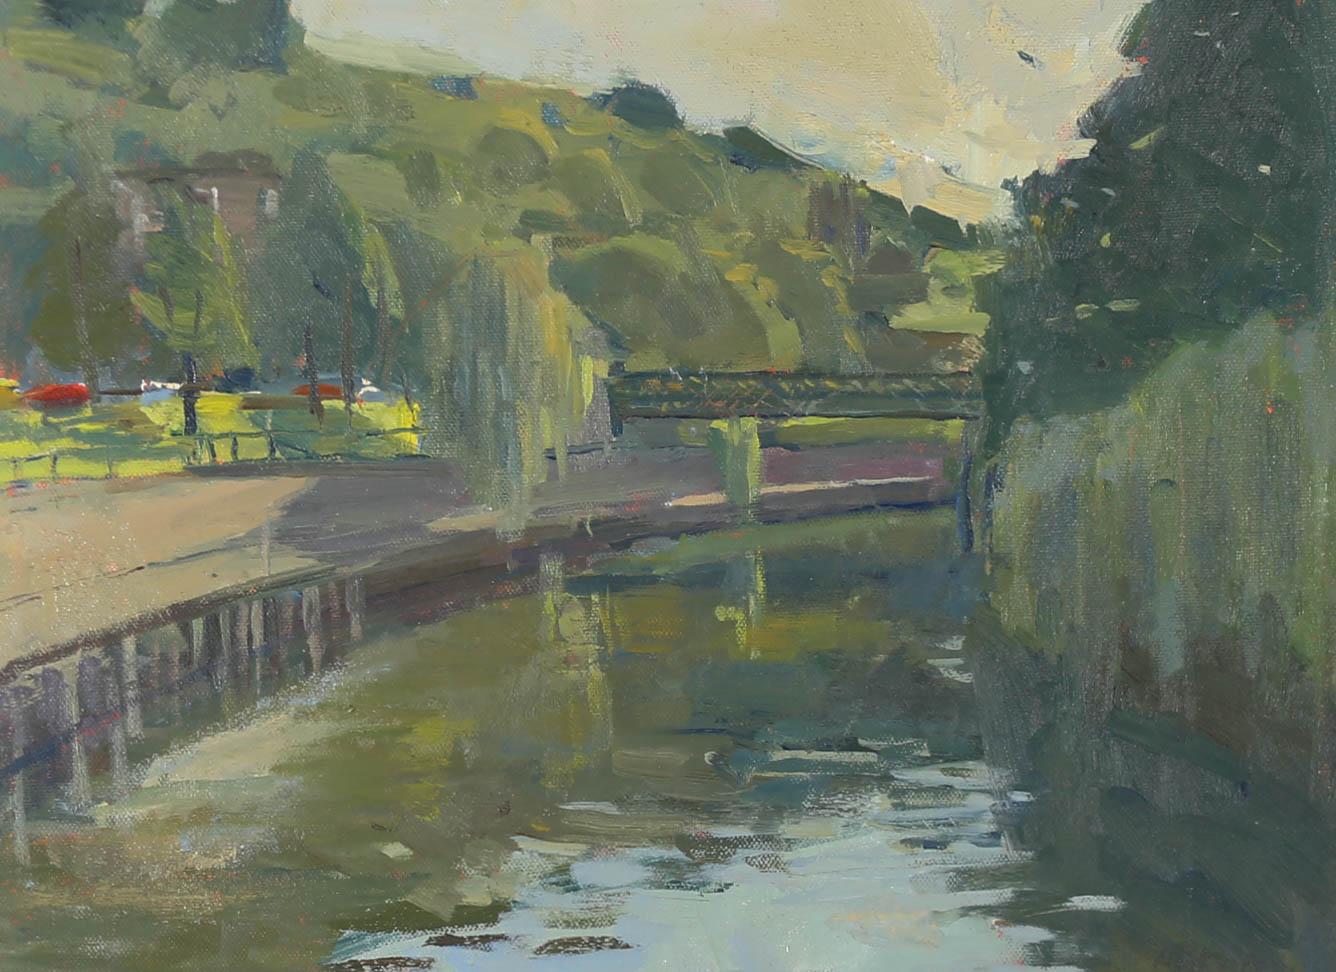 A fine impressionistic scene of Halfpenny bridge, crossing the River Avon in Bath. The artist has caught the view in a simple haze of green, with short directional brush strokes suggesting shadow and shape. Unsigned. The oil has been beautifully